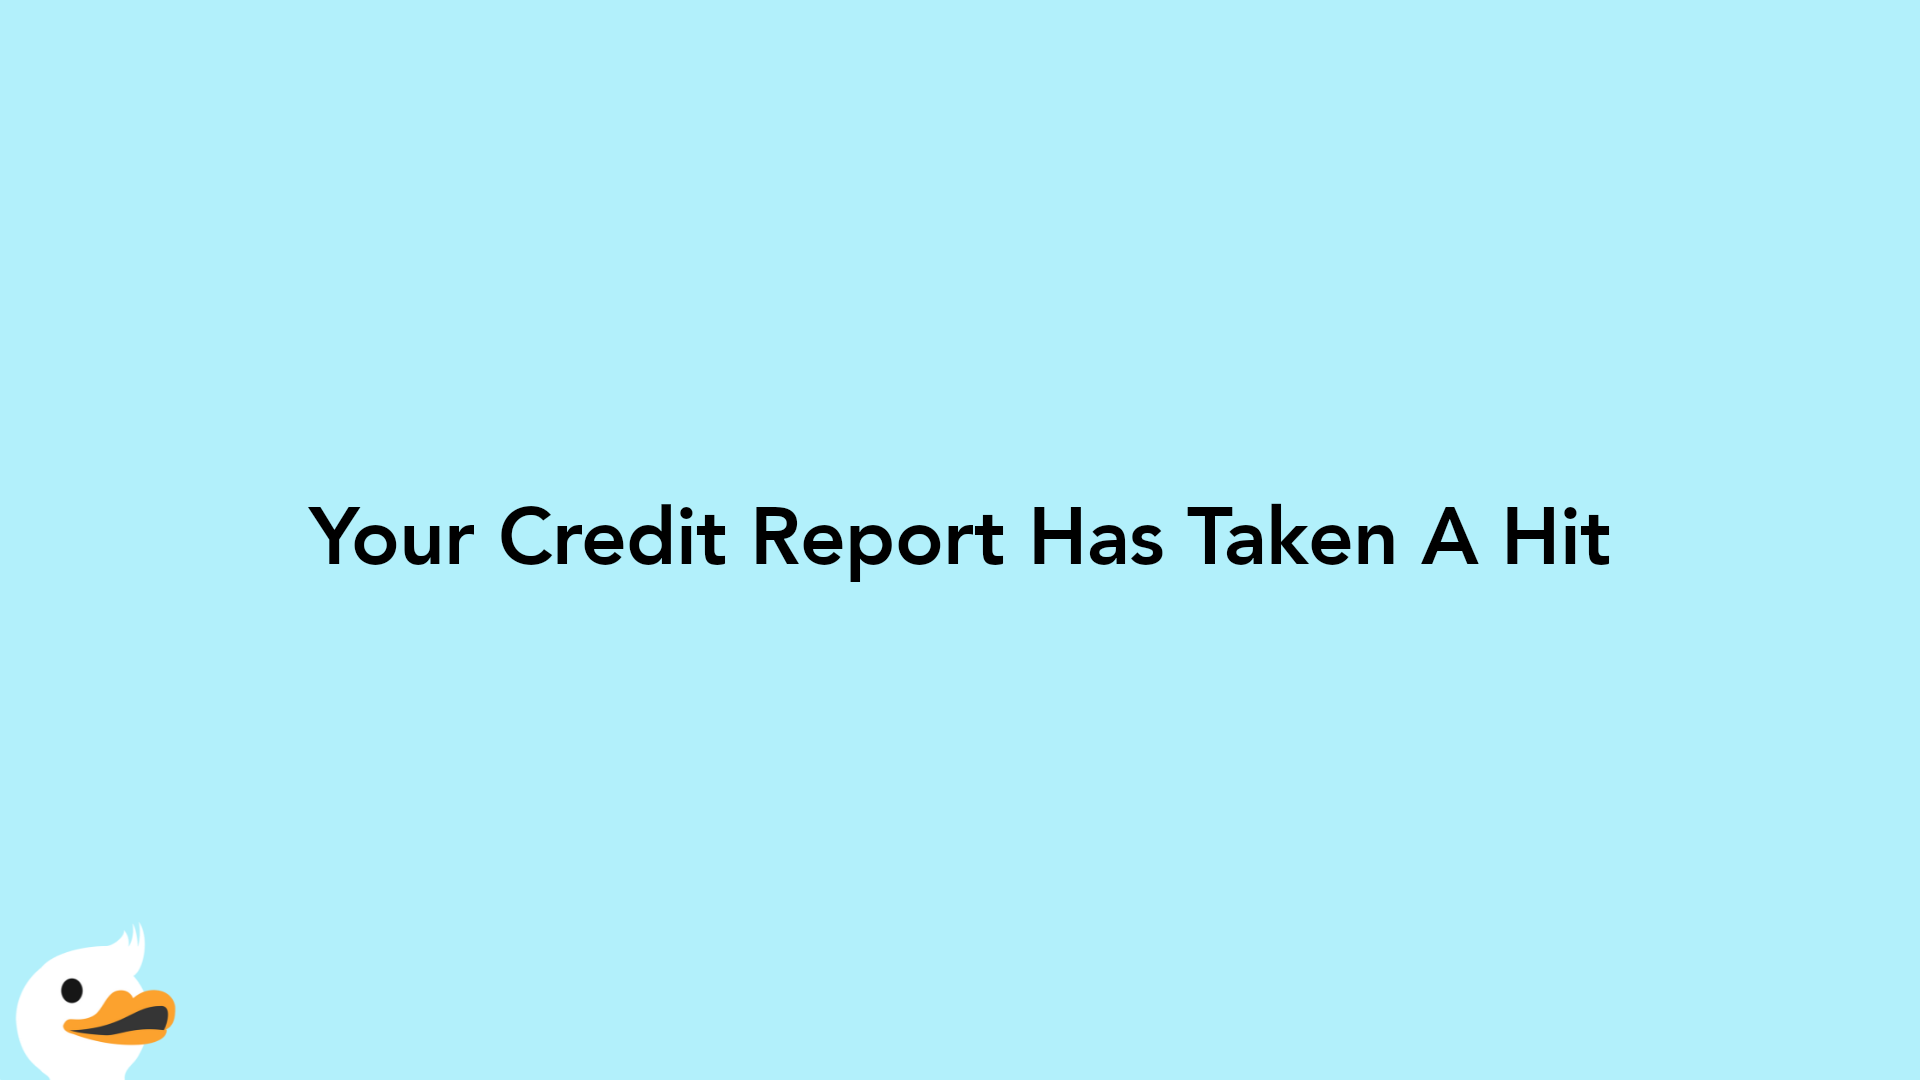 Your Credit Report Has Taken A Hit